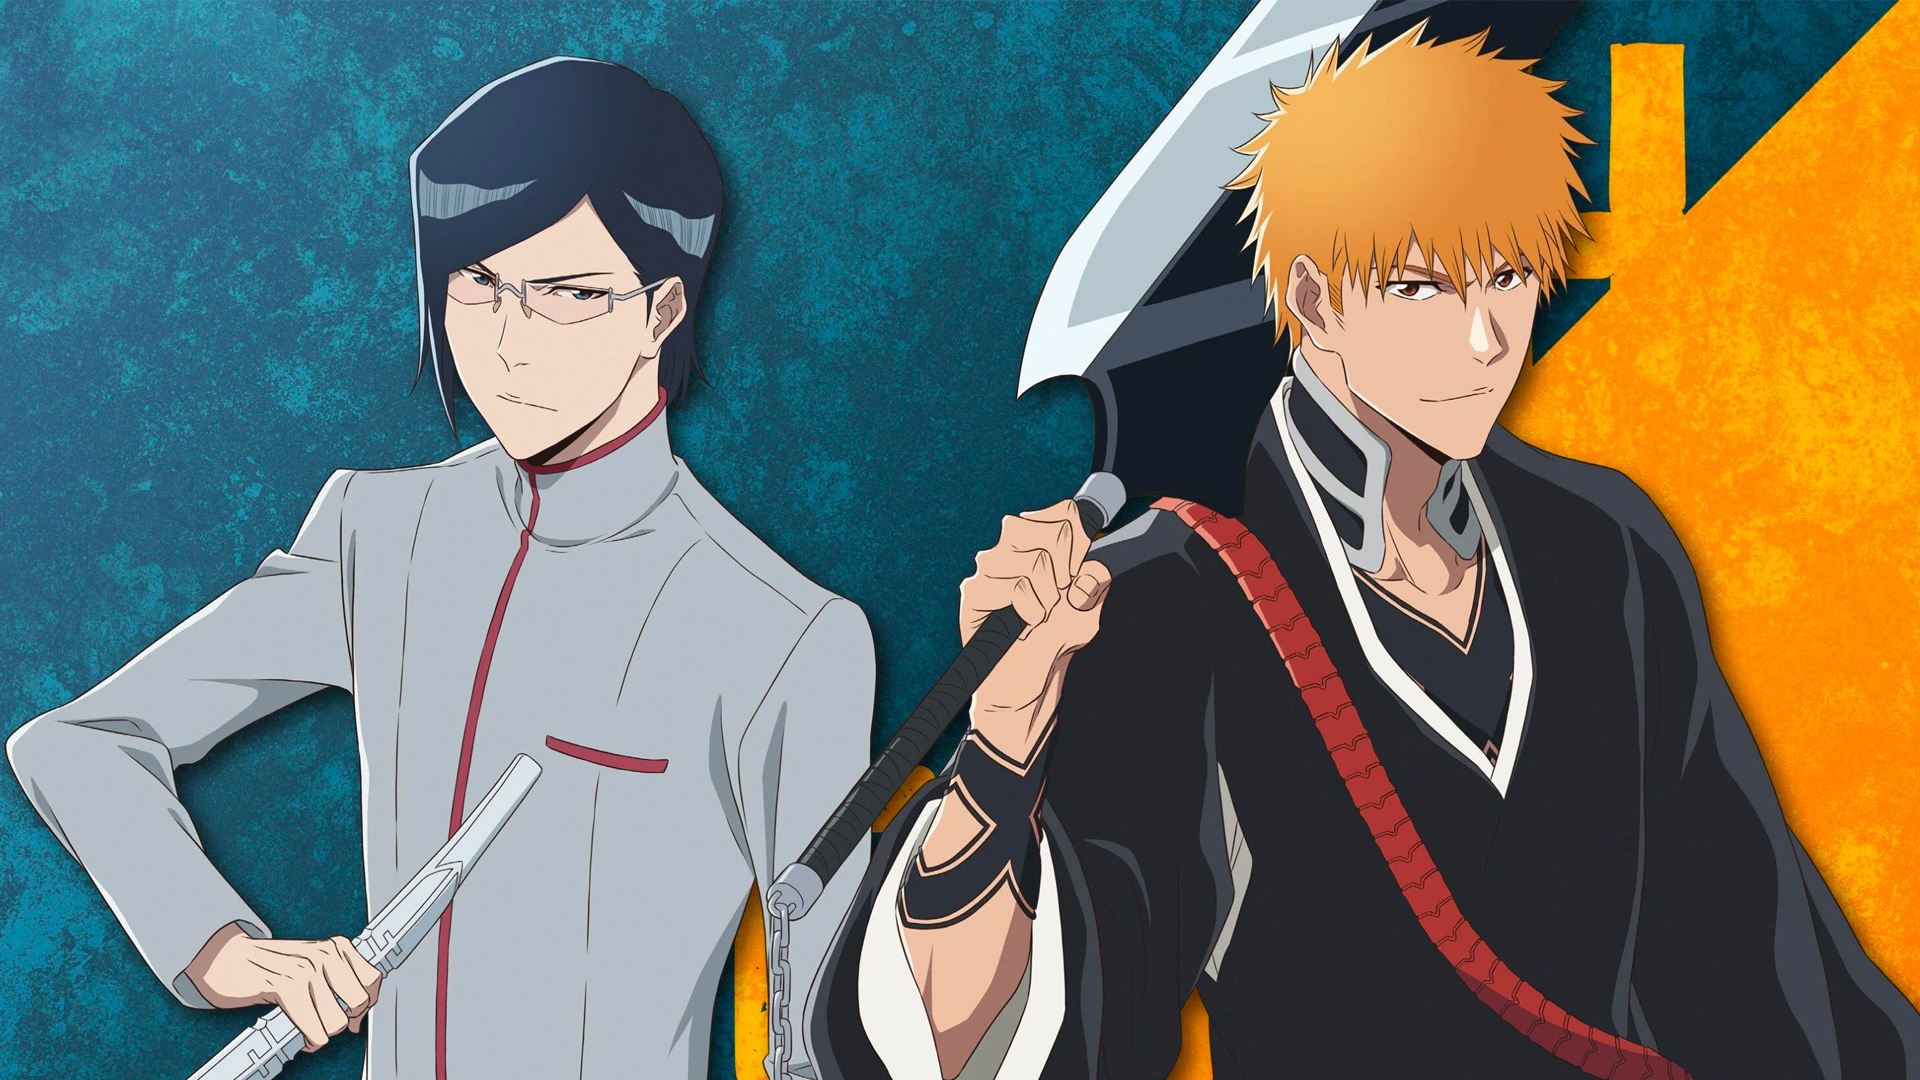 BLEACH: Thousand-Year Blood War, episode number revealed - Pledge Times